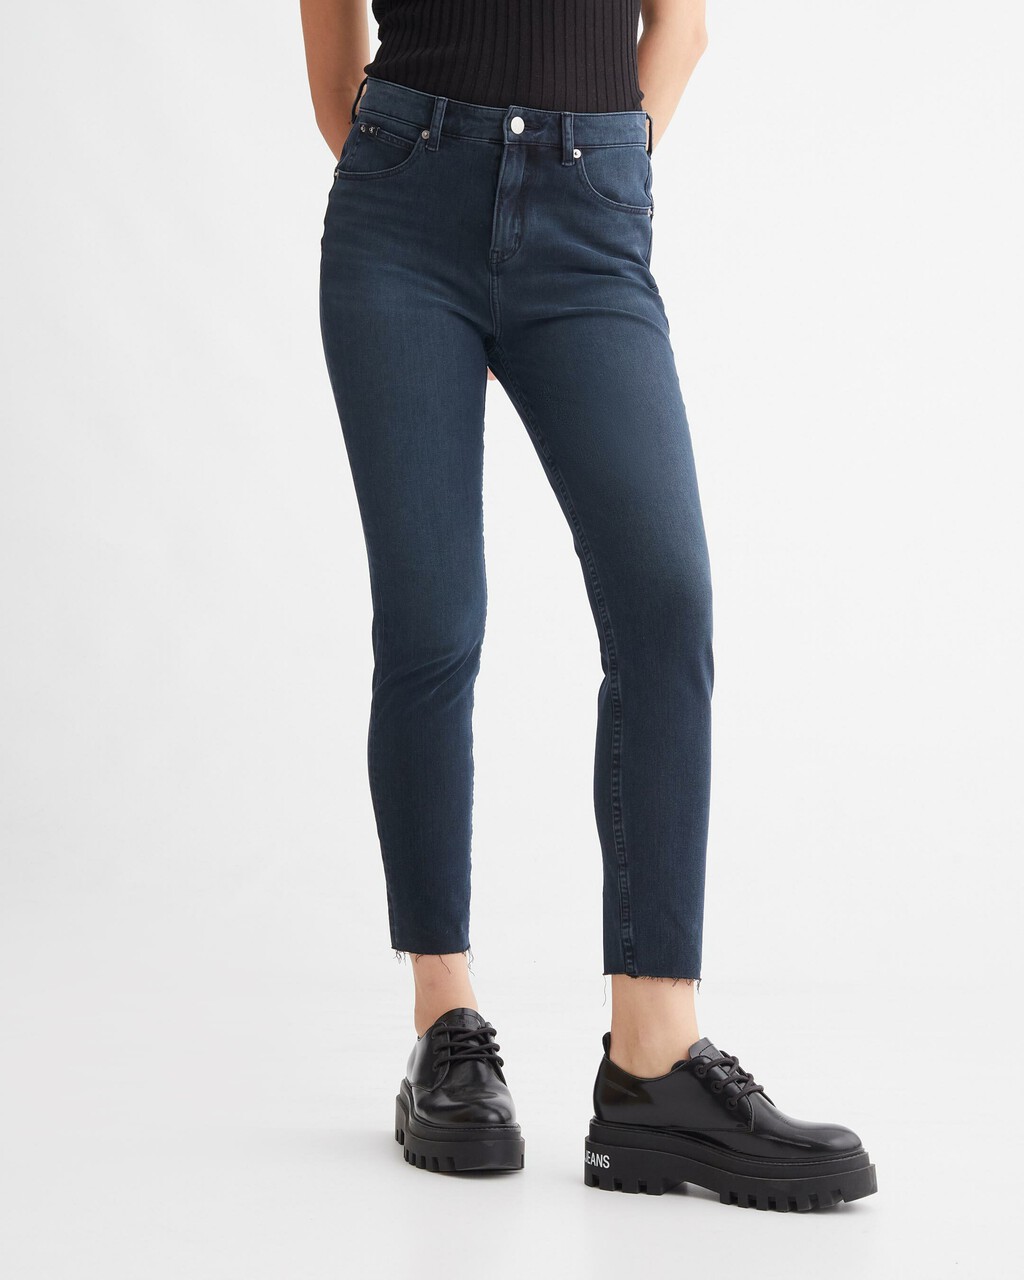 Ultimate Stretch High Rise Skinny Ankle Body Jeans, Blue Black Rwh, hi-res